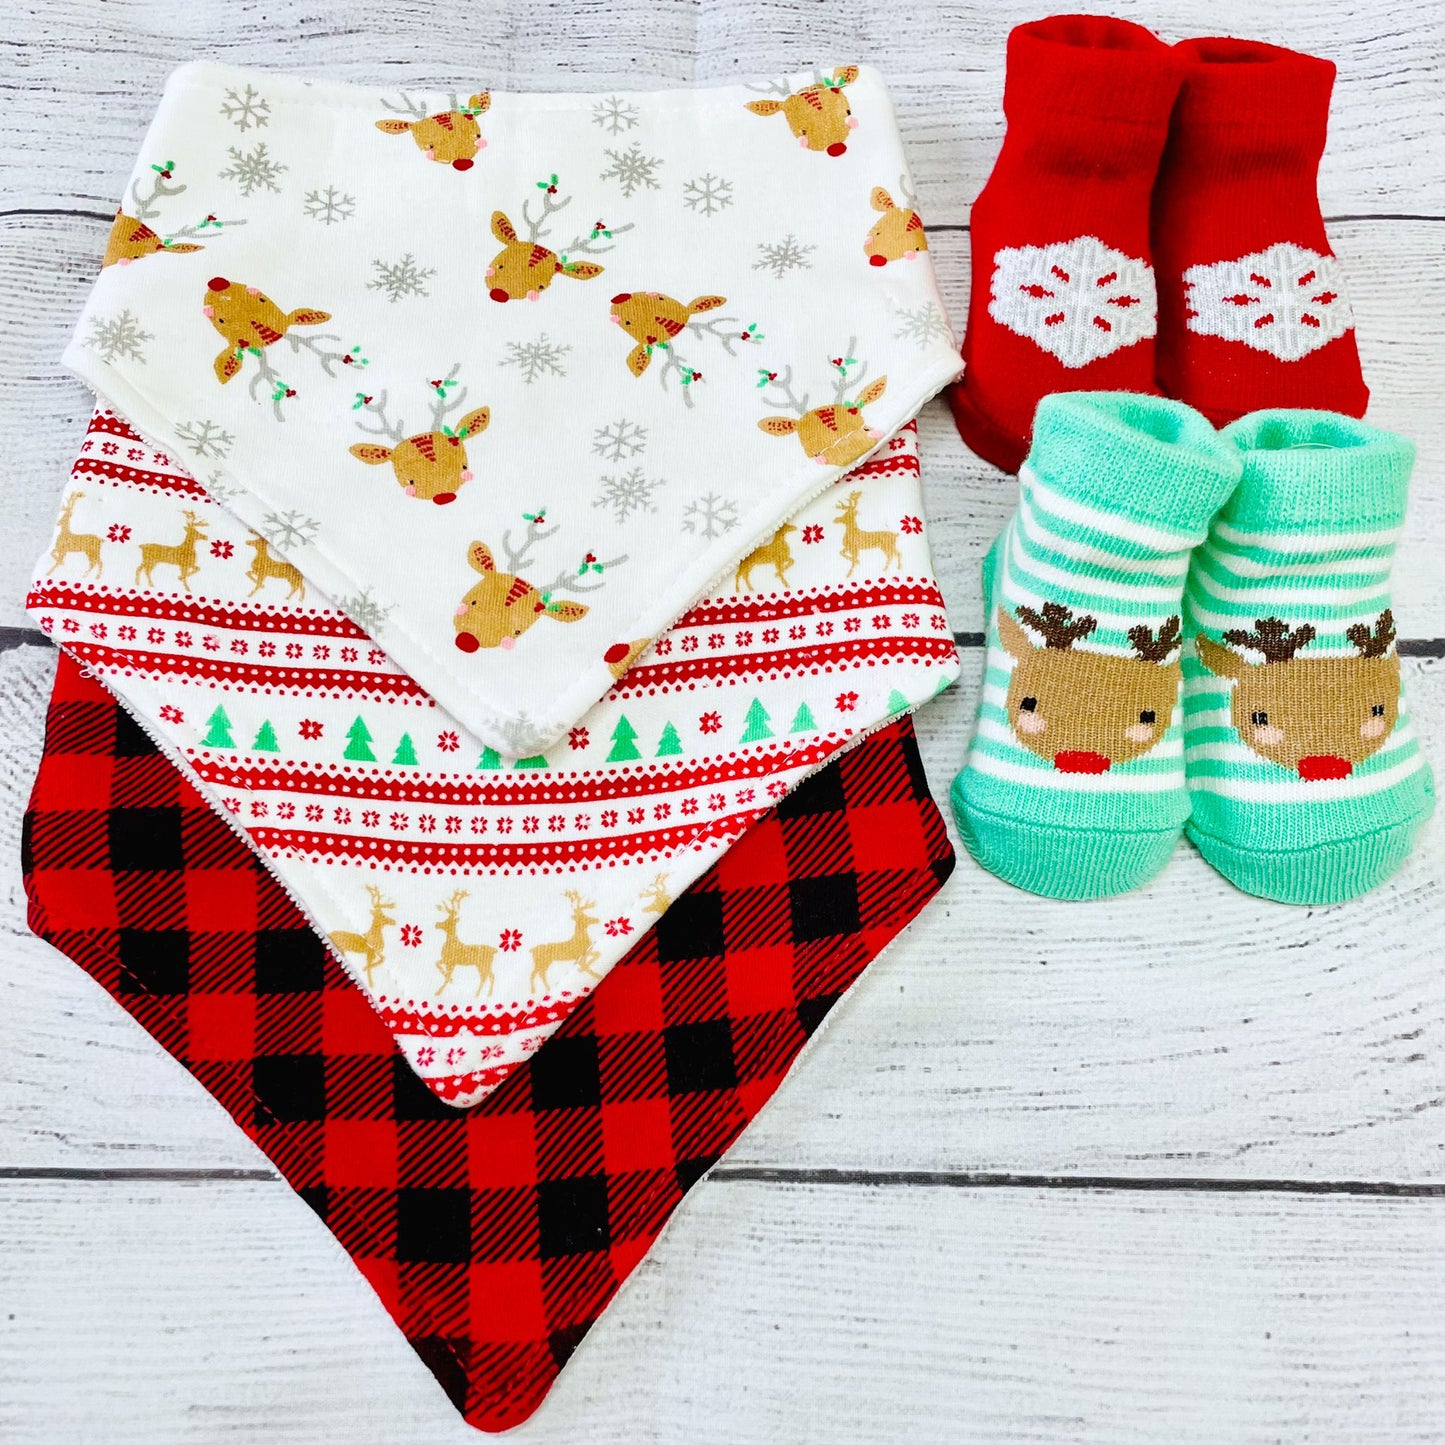 BABY'S FIRST CHRISTMAS Baby Bibs and Booties Set - Reindeer (Pack of 4)